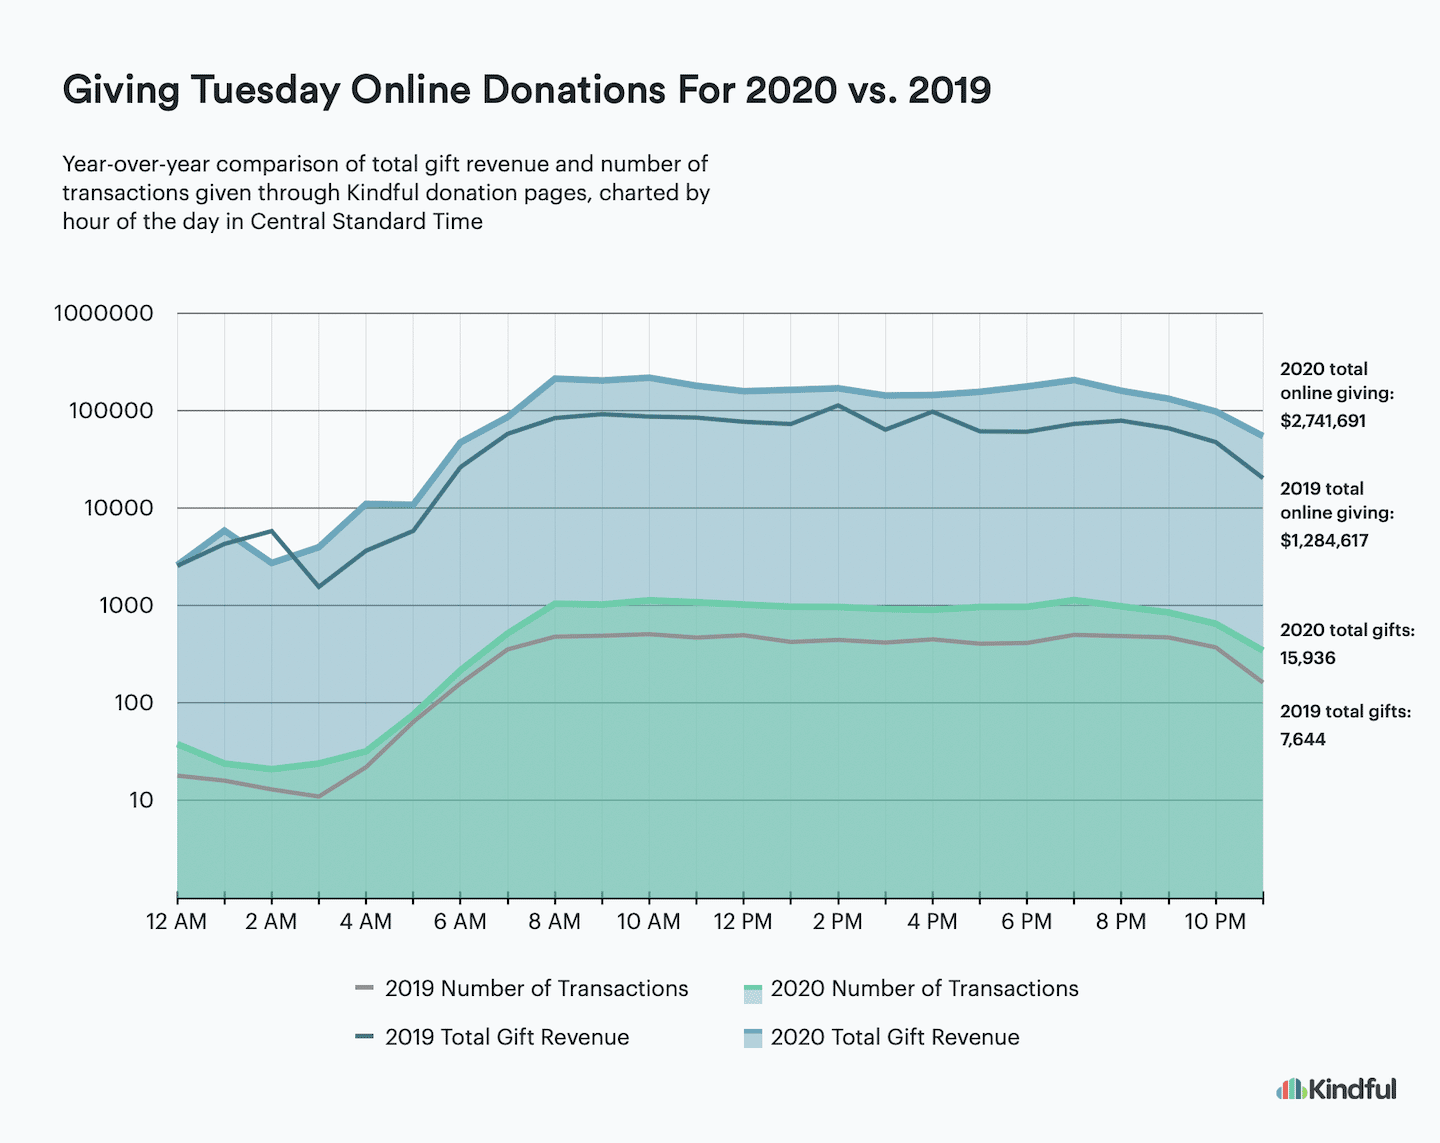 Giving Tuesday statistics on line graph showing online donations in 2020 versus 2019 in transactions and revenue